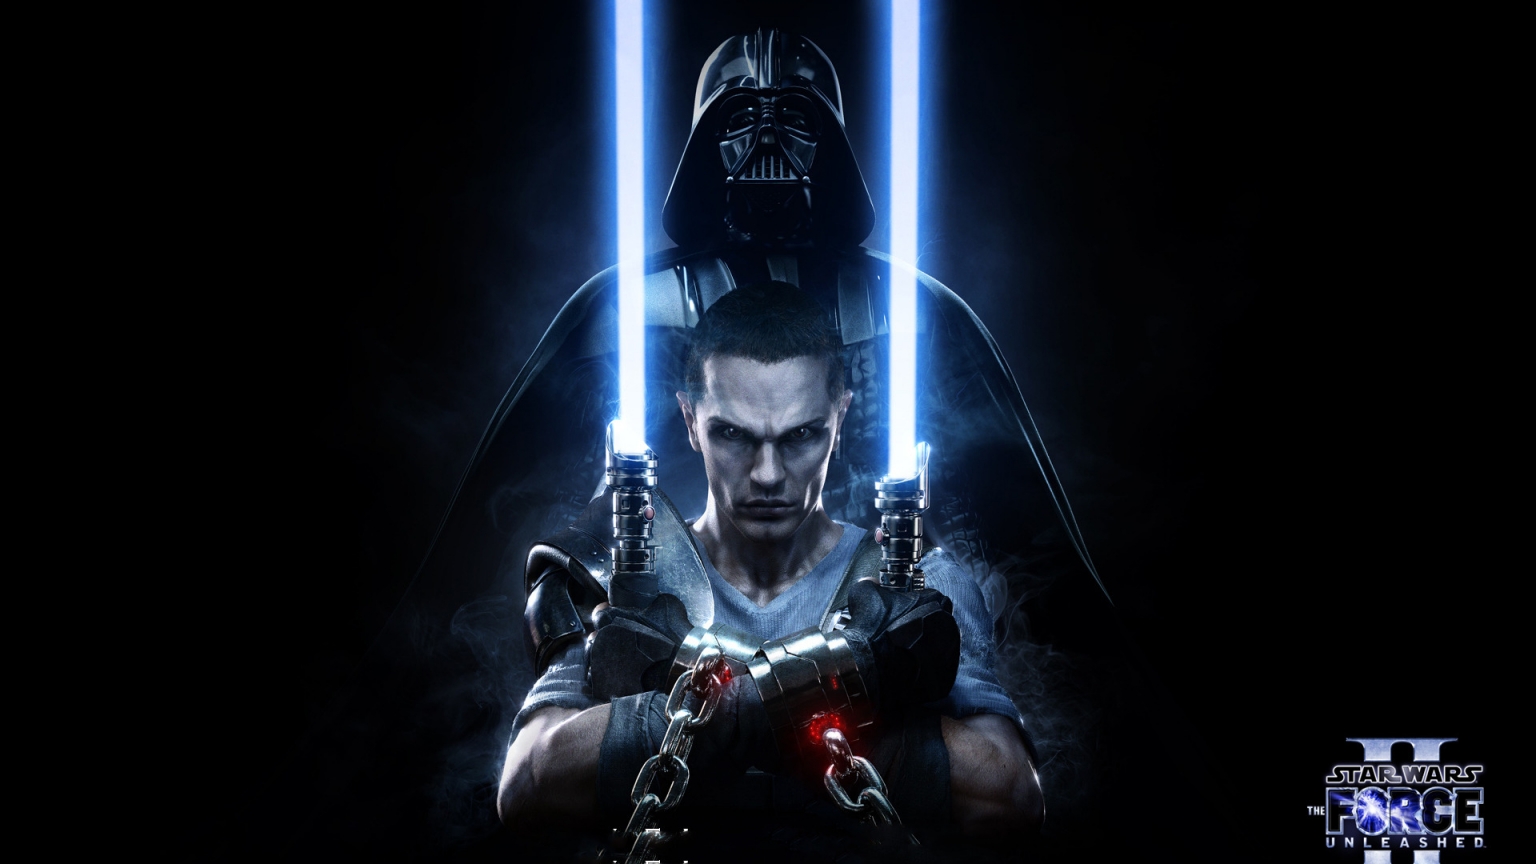 Star Wars The force Unleashed 2 Poster for 1536 x 864 HDTV resolution